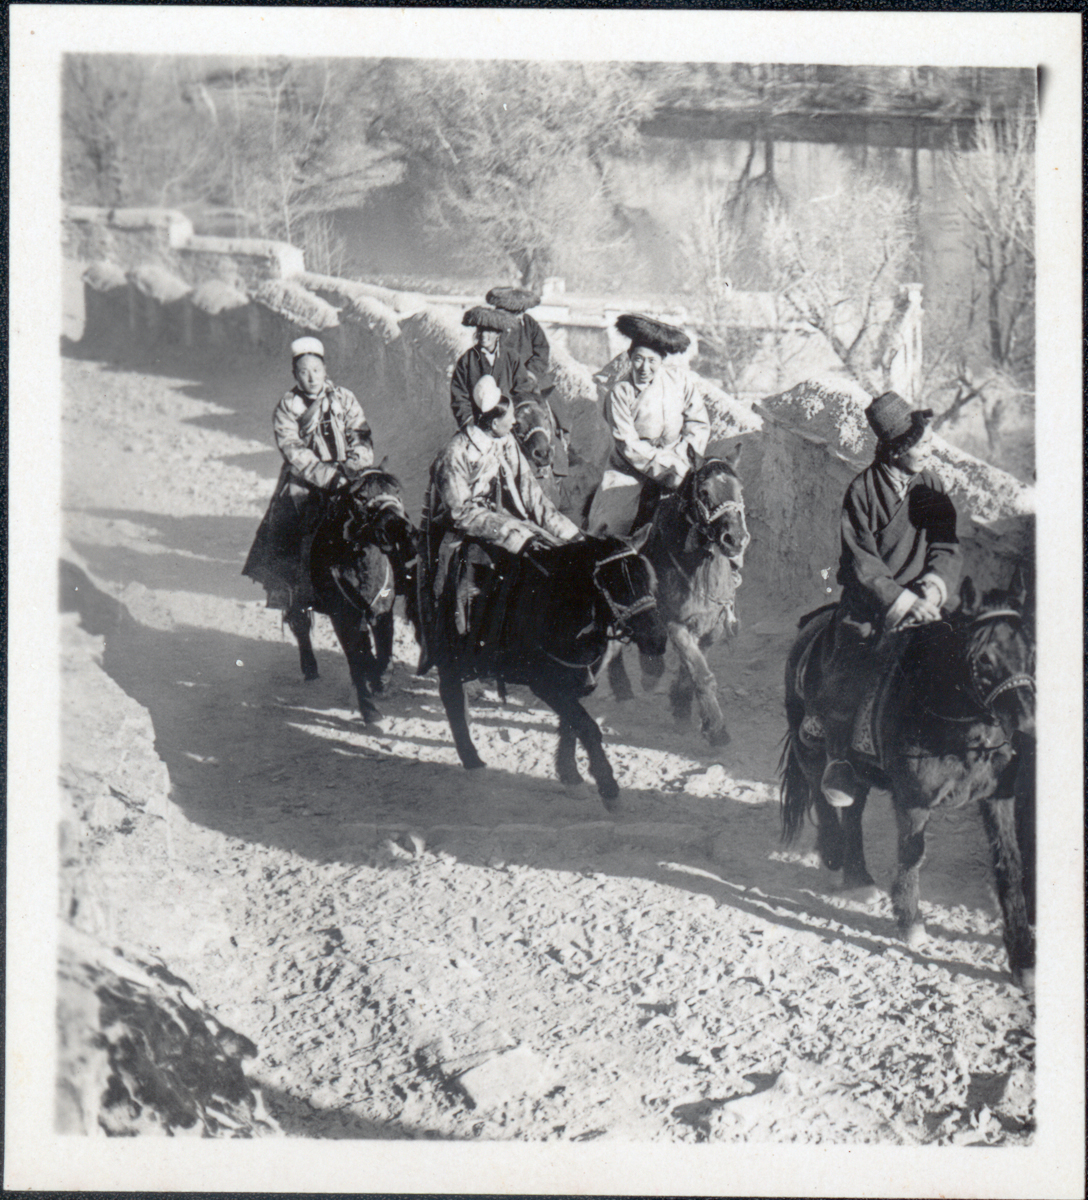 Black and white photograph of six officials riding on horseback up dusty hillside path